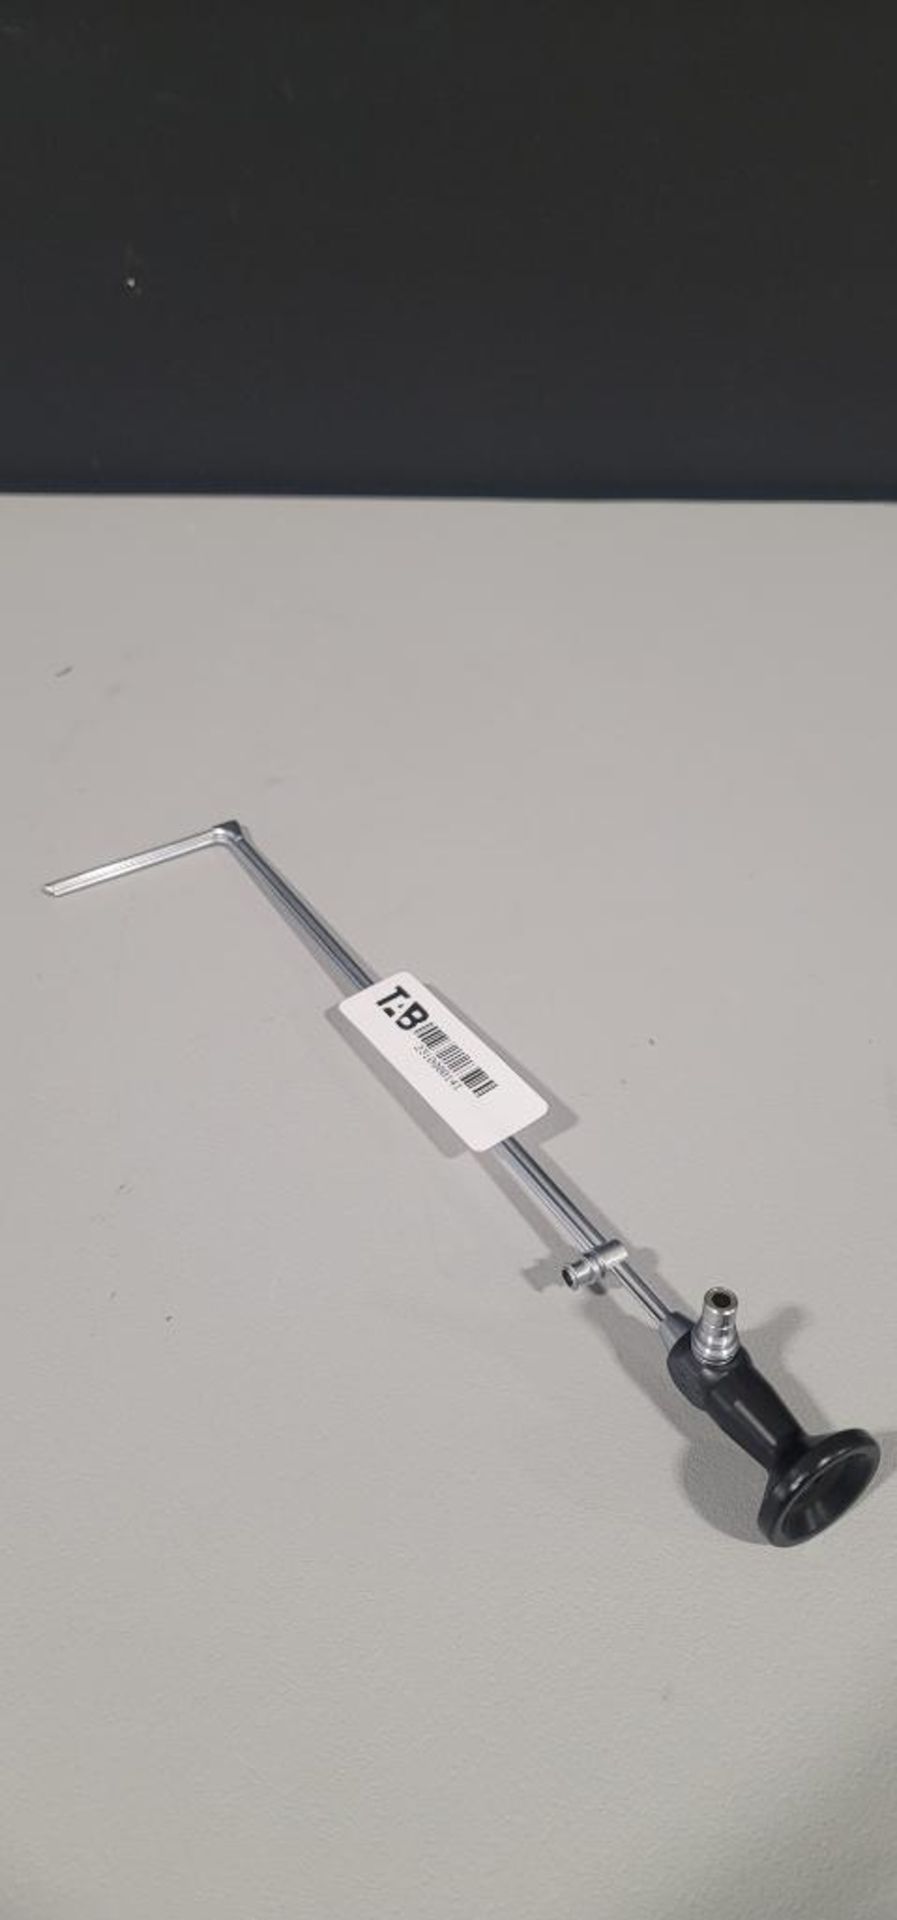 KARL STORZ 28022A 0 DEGREE AUTOCLAVABLE NEPHROSCOPE - Image 2 of 3